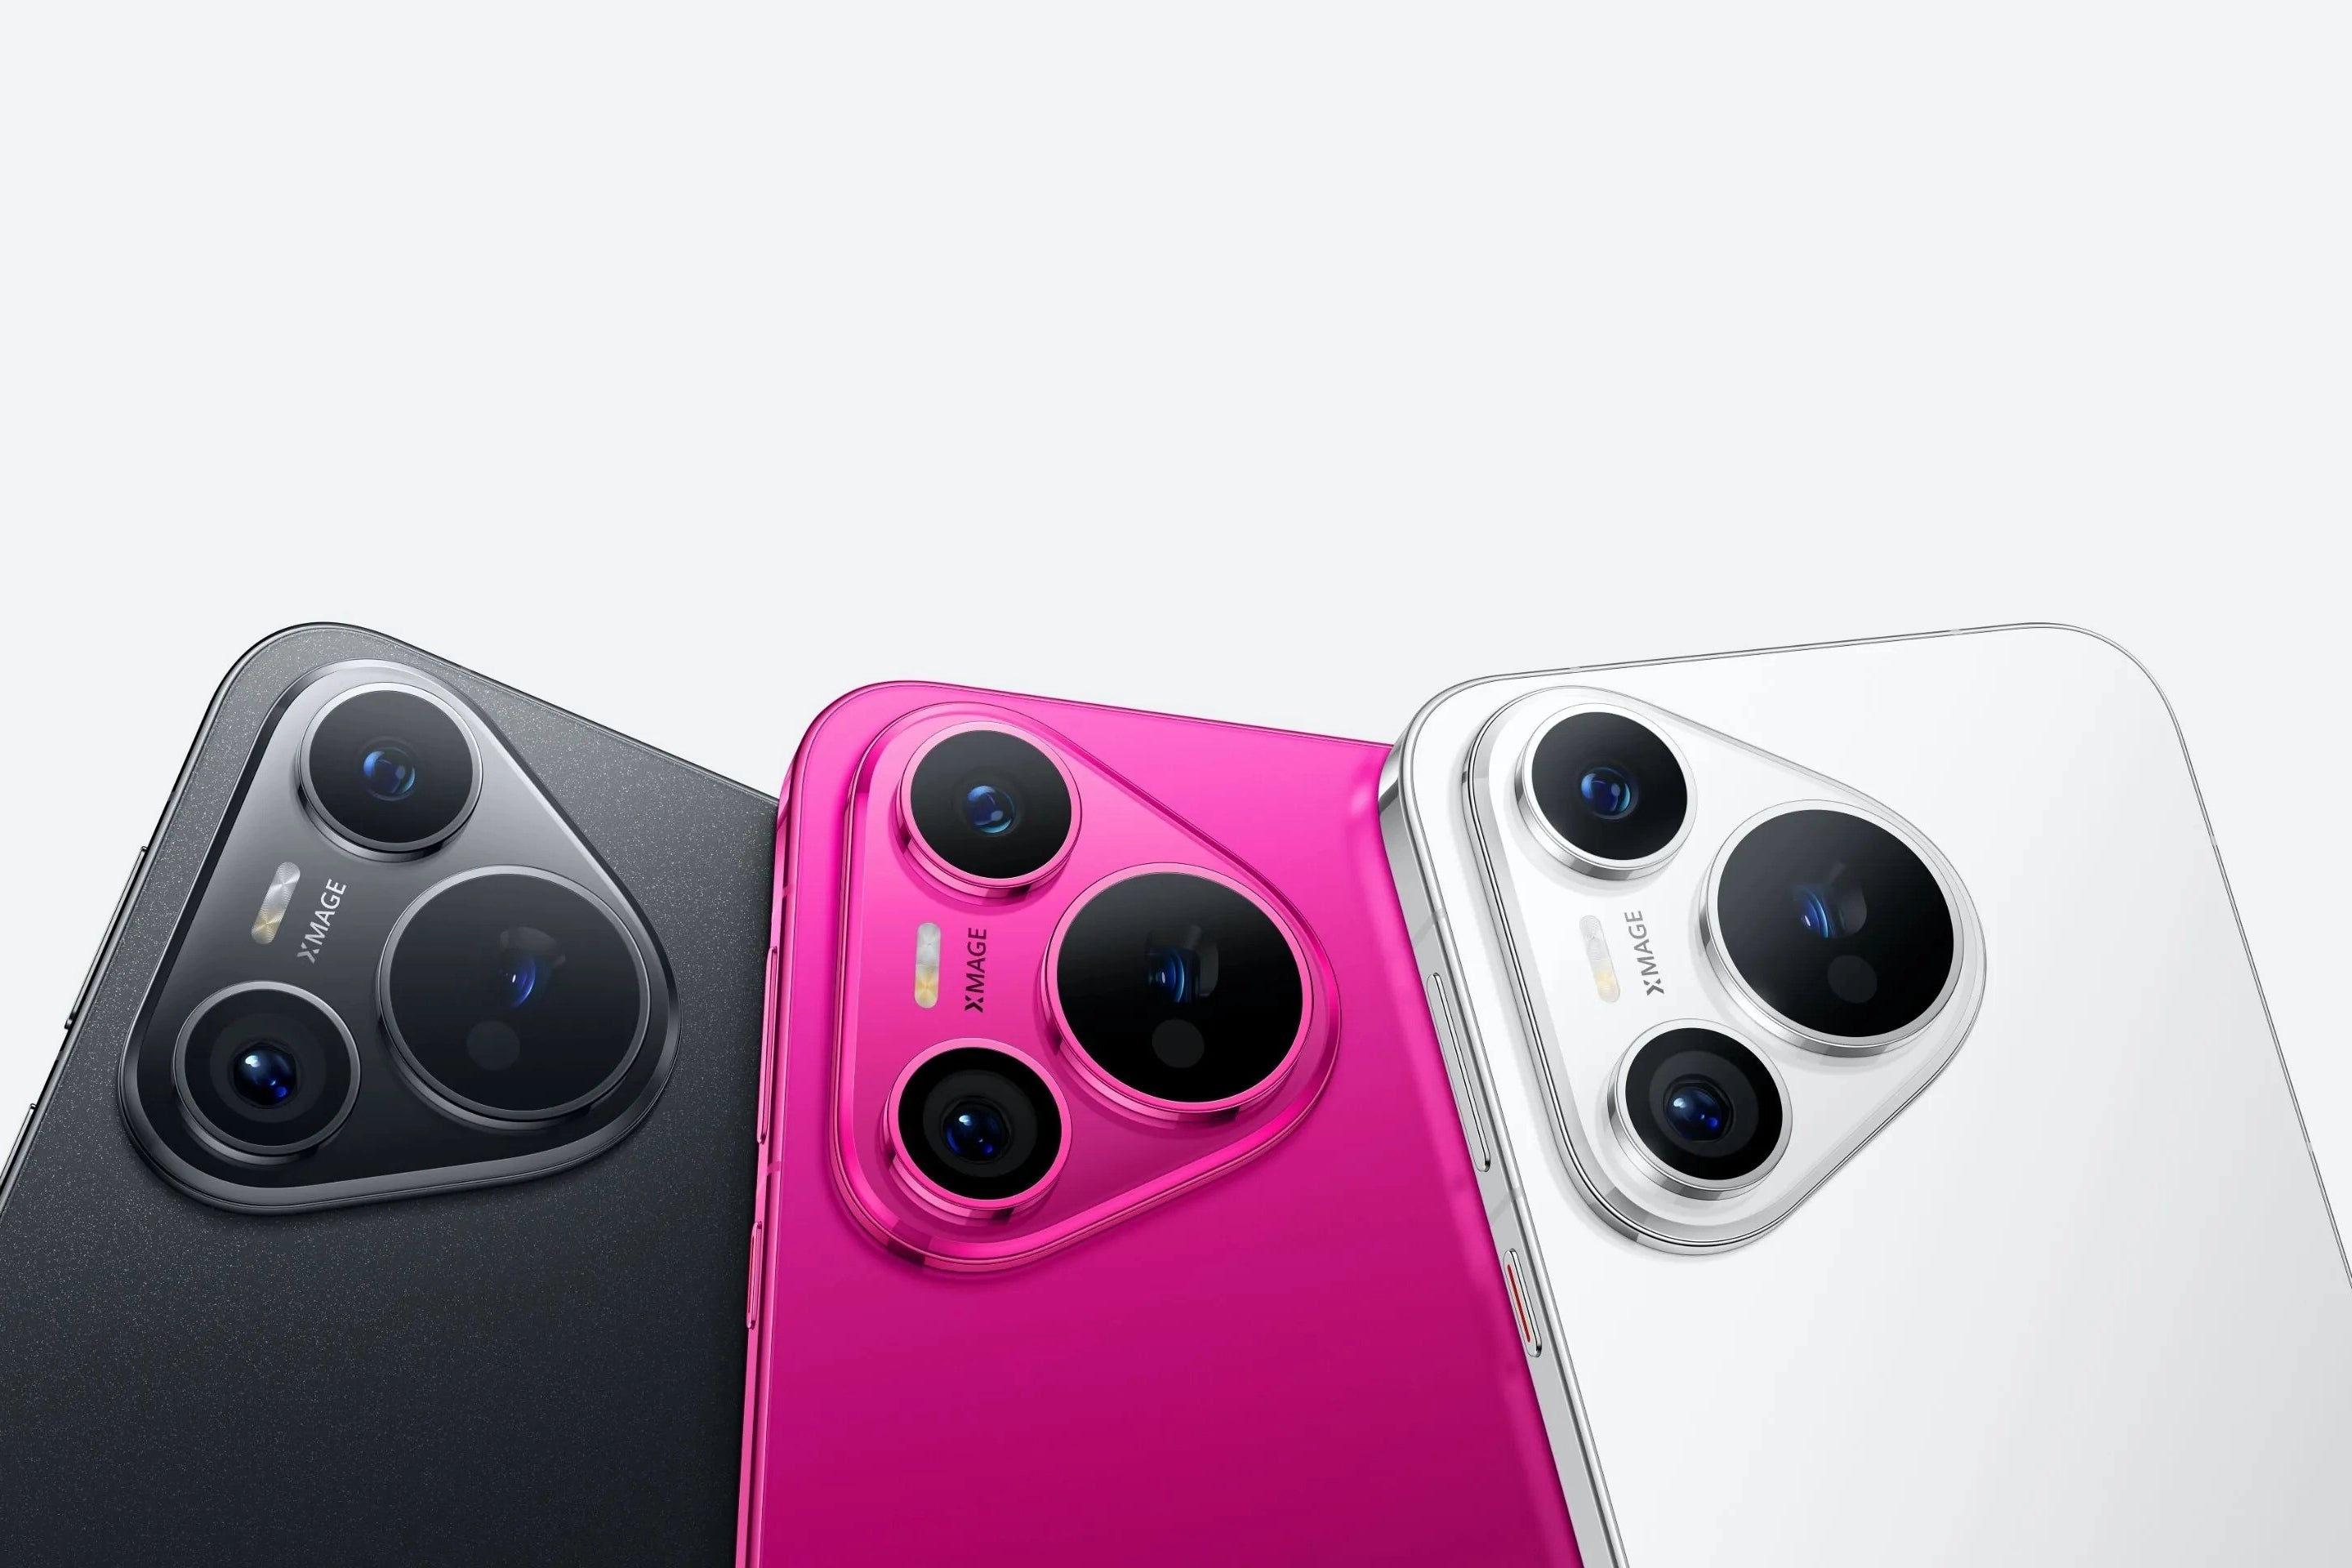 The Pura 70 in Black, Pink and White (Image Credit–Huawei) - Huawei’s camera-centric Pura 70 series goes global